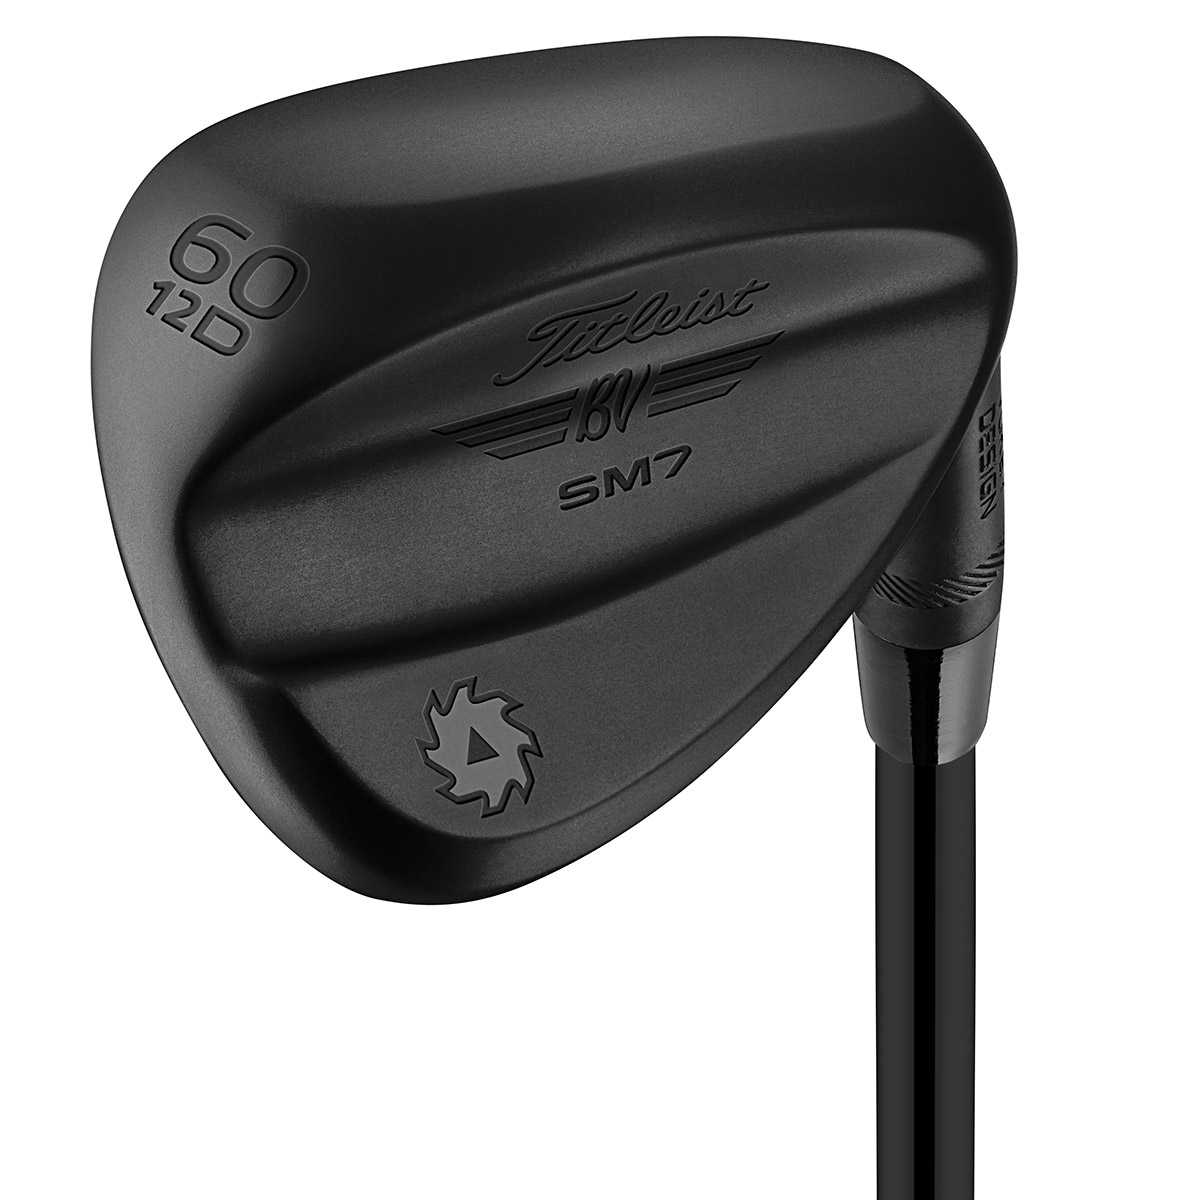 Titleist SM7 Vokey All Black Wedge from american golf